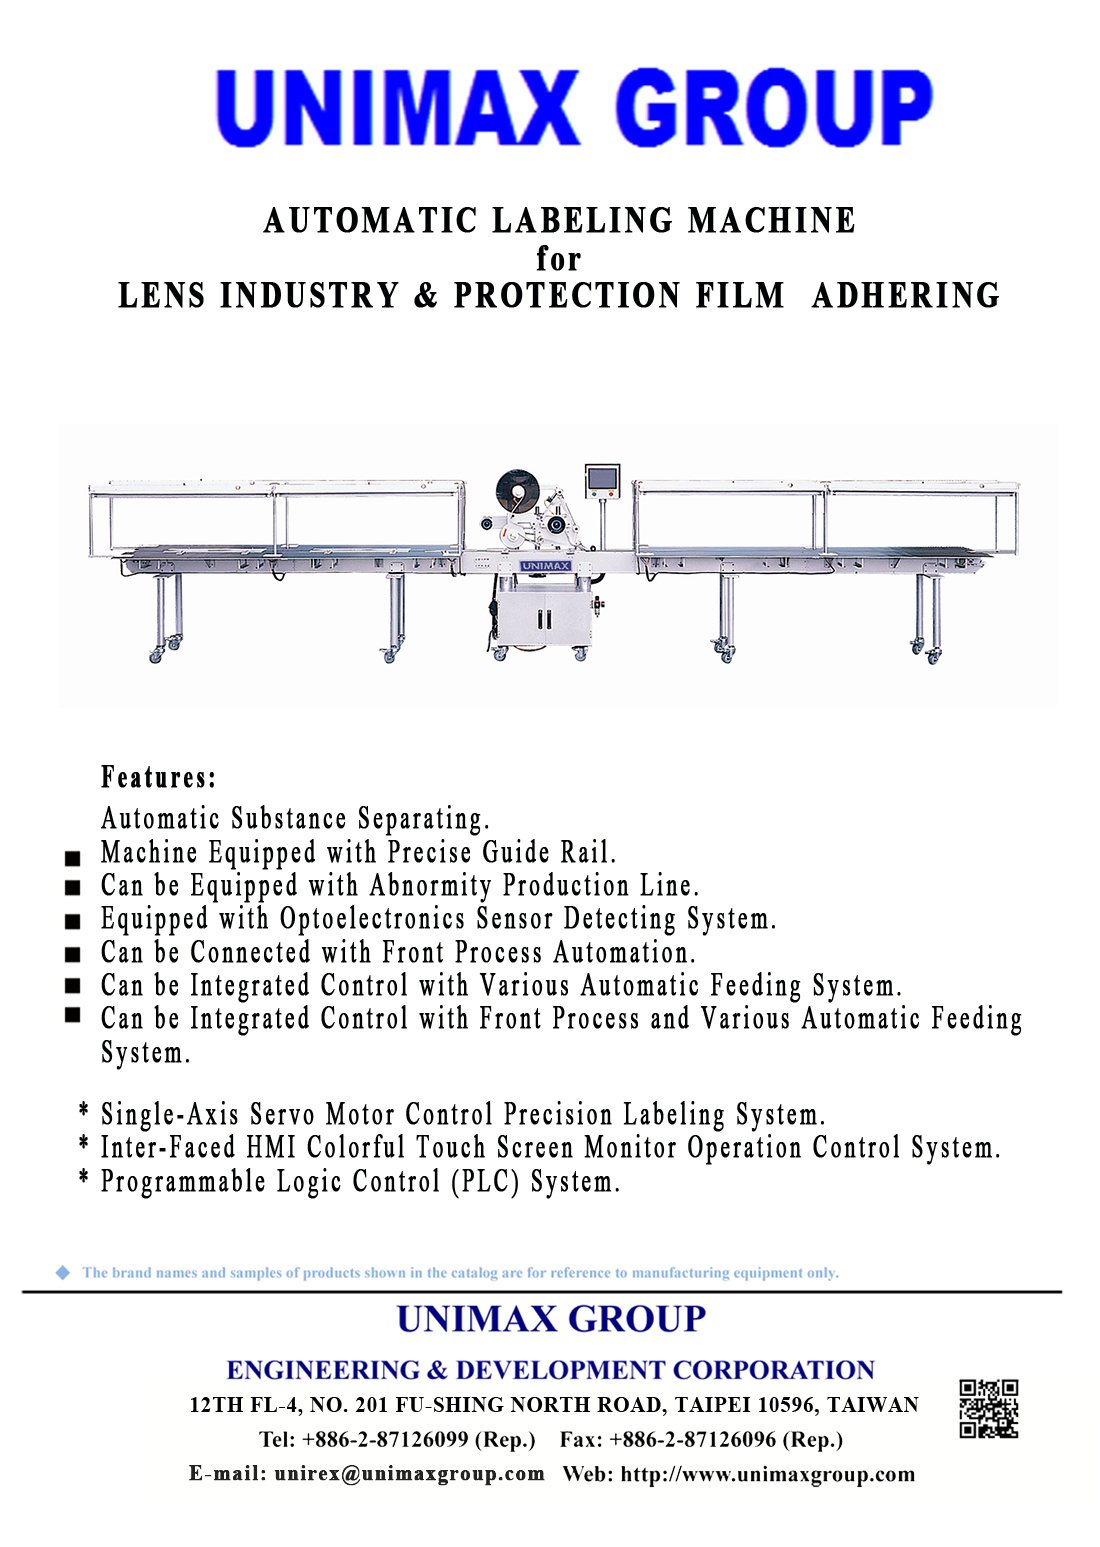 High-Tech Procucts Labeling Machine for Lens Industry and Protection Film Automatic Adhering